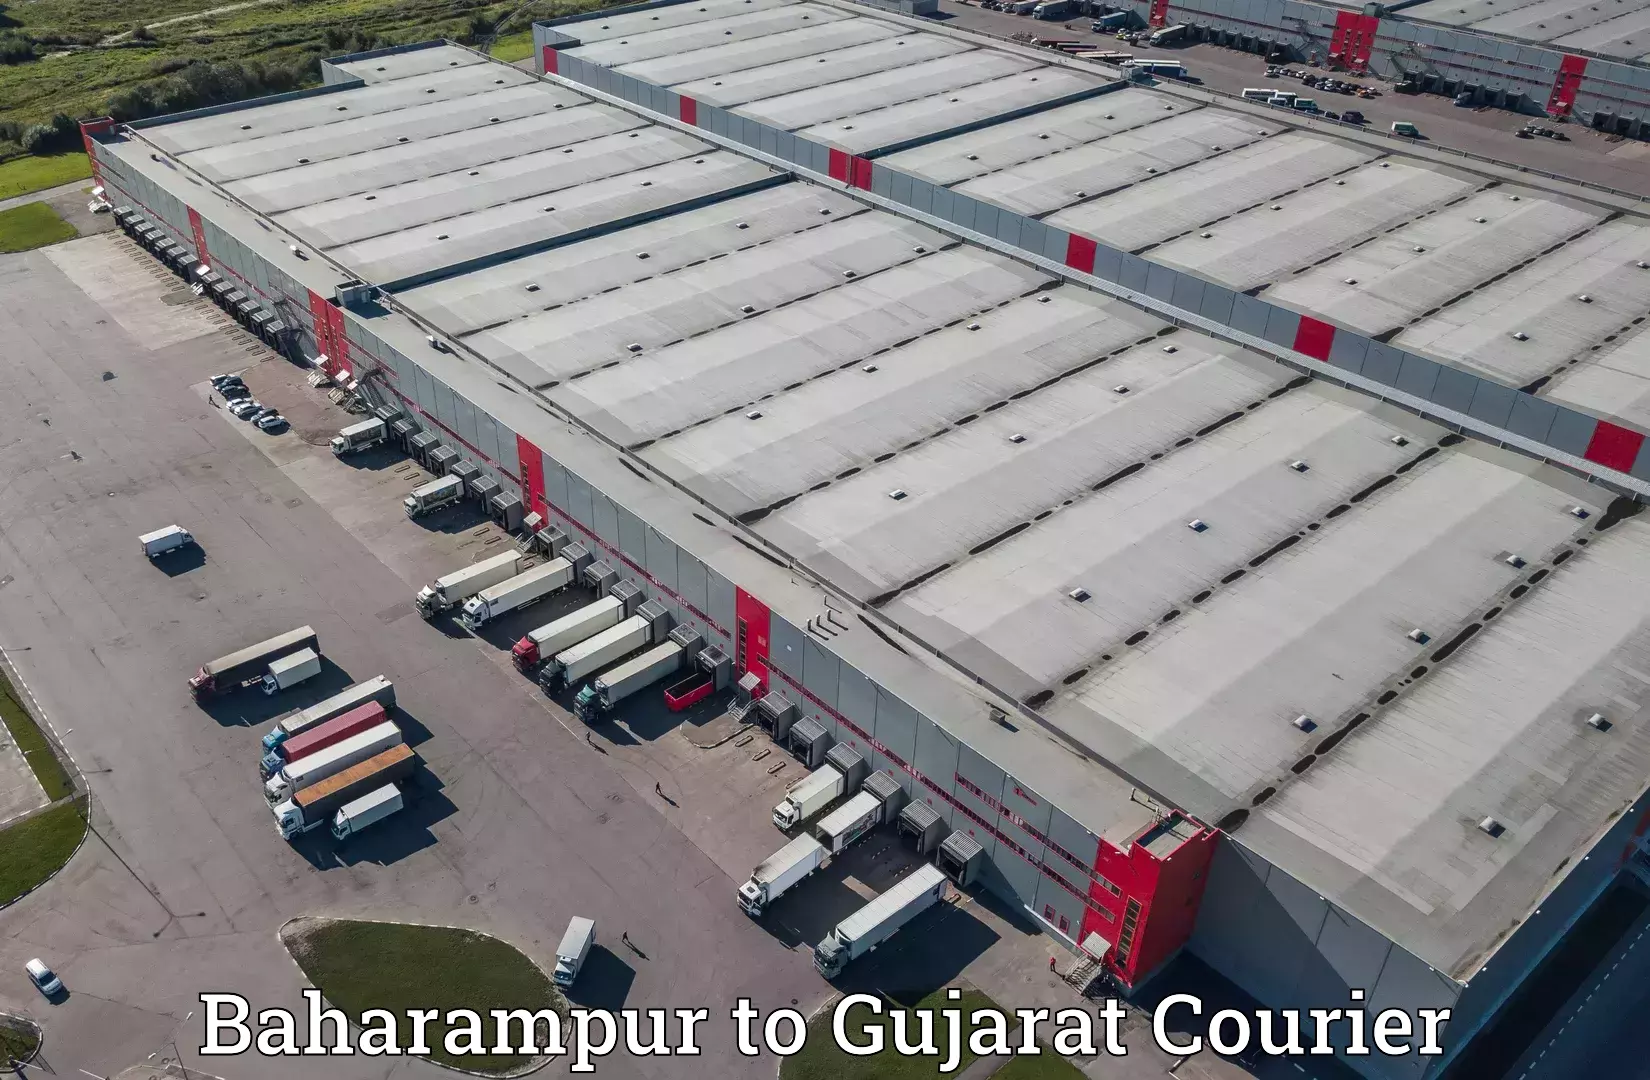 Reliable delivery network Baharampur to Narmada Gujarat